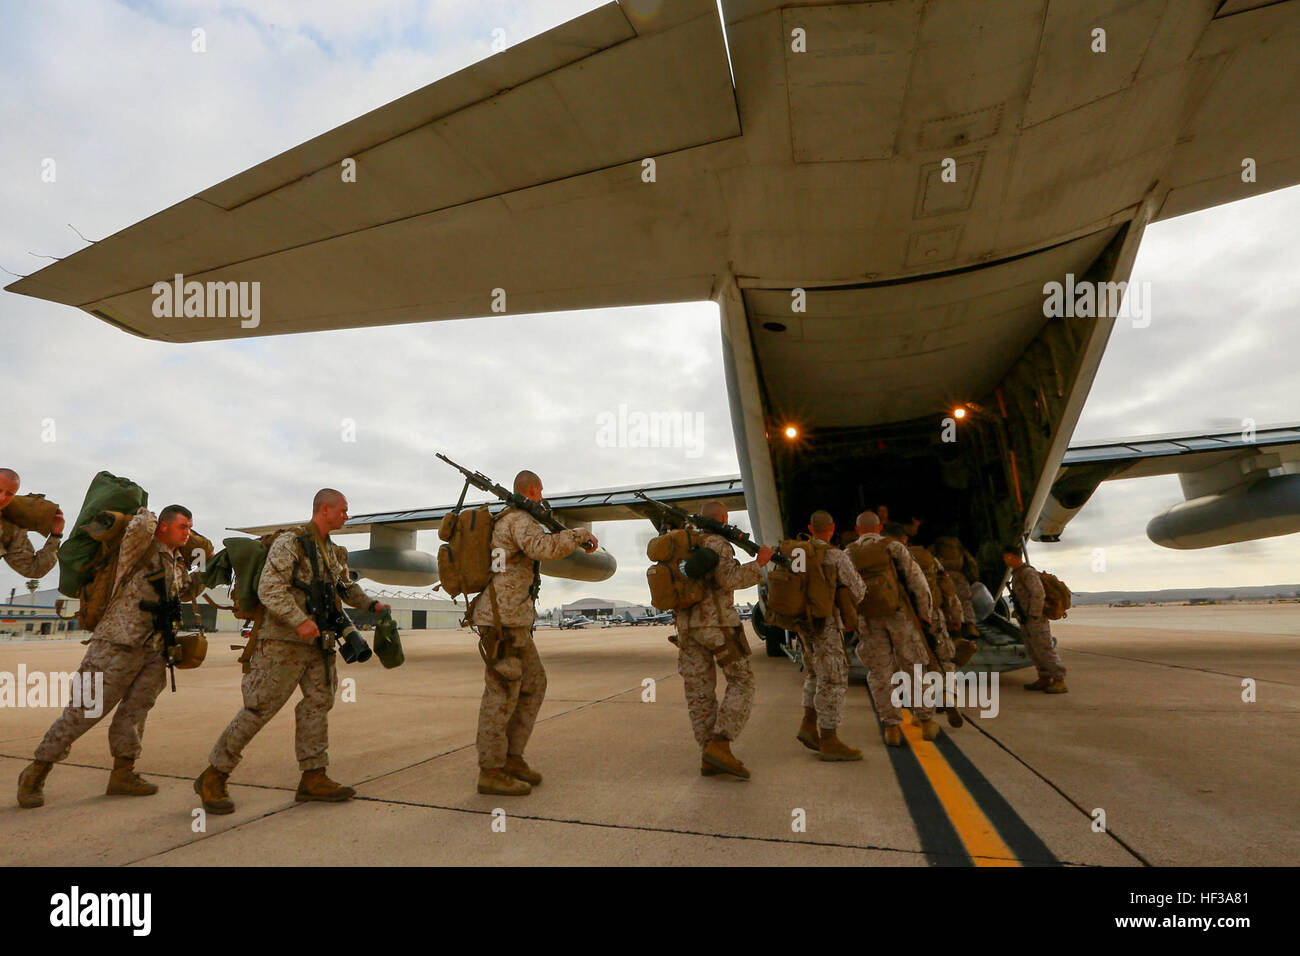 U.S. Marines with India Company, Battalion Landing Team 3rd Battalion, 1st Marine Regiment, 15th Marine Expeditionary Unit board a KC-130J Hercules aboard Marine Corps Air Station Miramar, Calif., May 13, 2015. The Marines of BLT 3/1 head to Hawaii for sustainment training before boarding the USS Anchorage (LPD-23) for their deployment through the Pacific and Central Command area. (U.S. Marine Corps photo by Sgt. Jamean Berry/Released) Leaving on a jet plane, 3-1 Marines depart for Hawaii 150513-M-GC438-023 Stock Photo